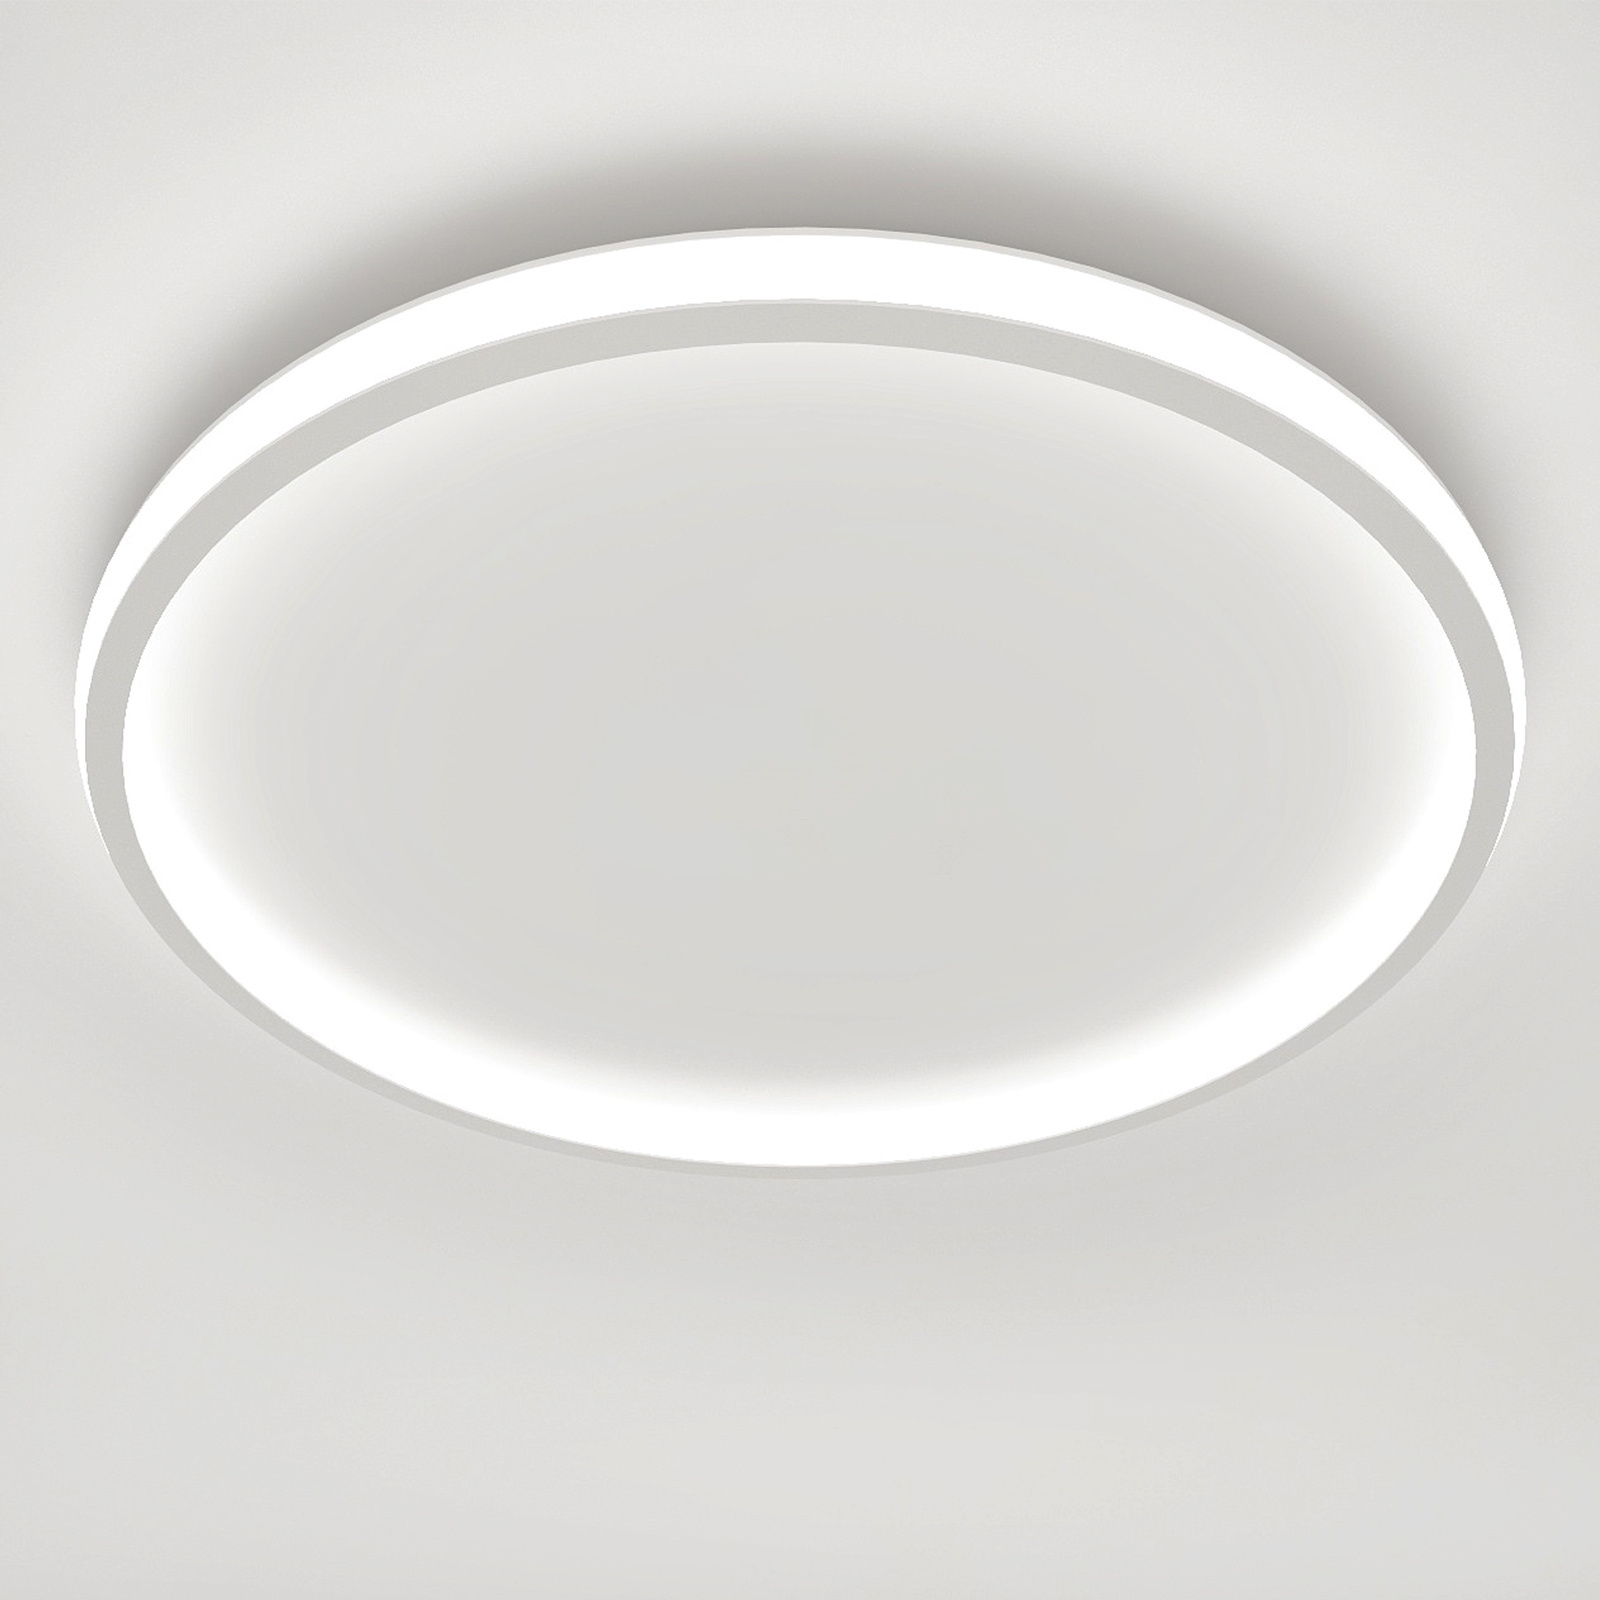 Flush Mount LED Ceiling Light,Cheeroll 12 Inch Ceiling Lighting Fixture 45W 6500K Cold White Light Round Ceiling Light,for Bathroom, Kitchen, Bedroom, Living Room, Garage Non Dimmable